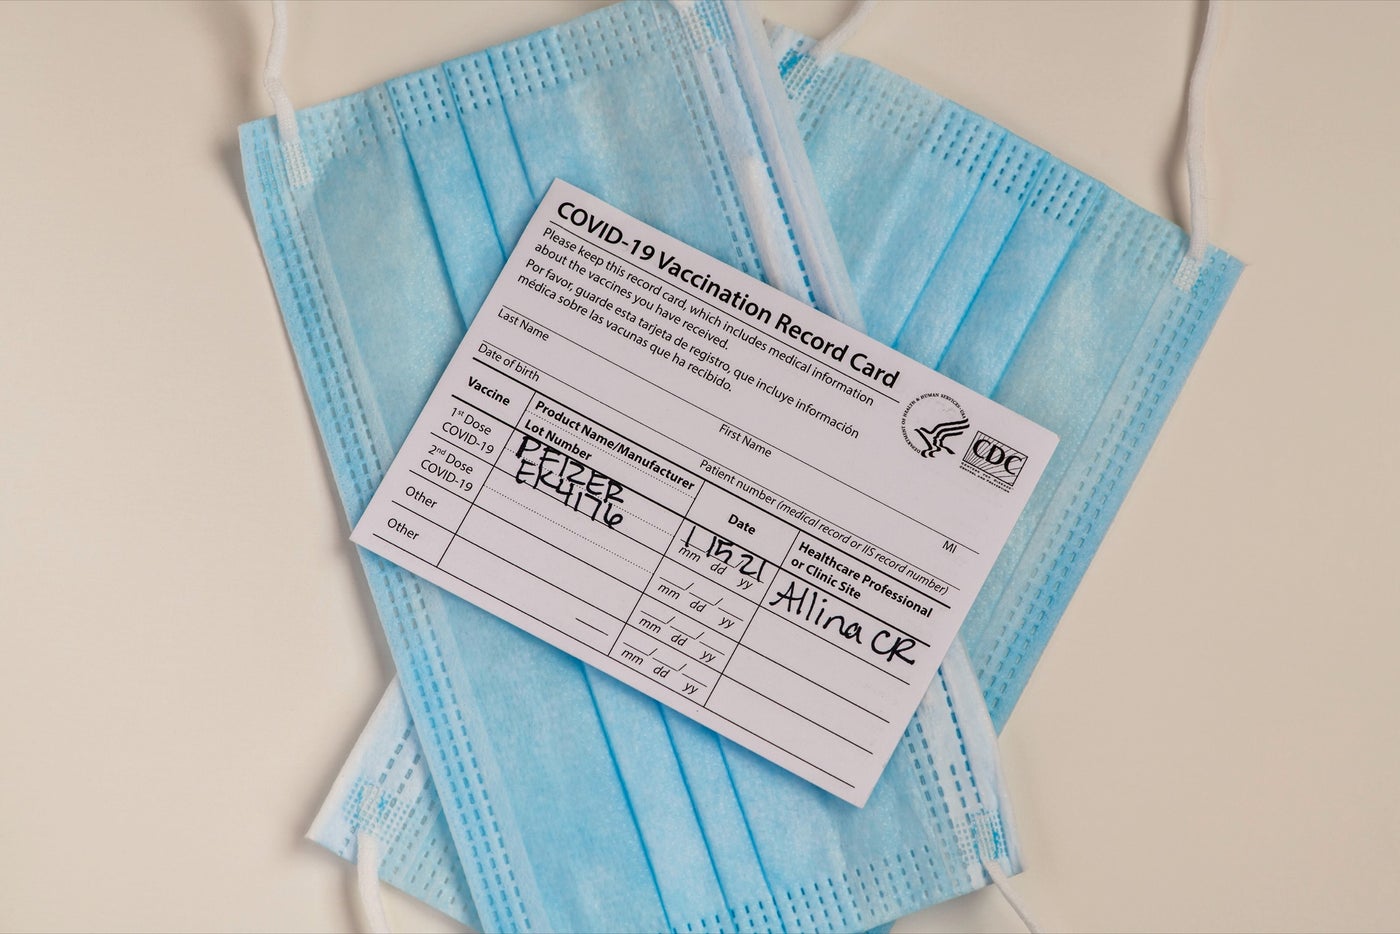 Should you laminate your CDC COVID19 vaccine card?